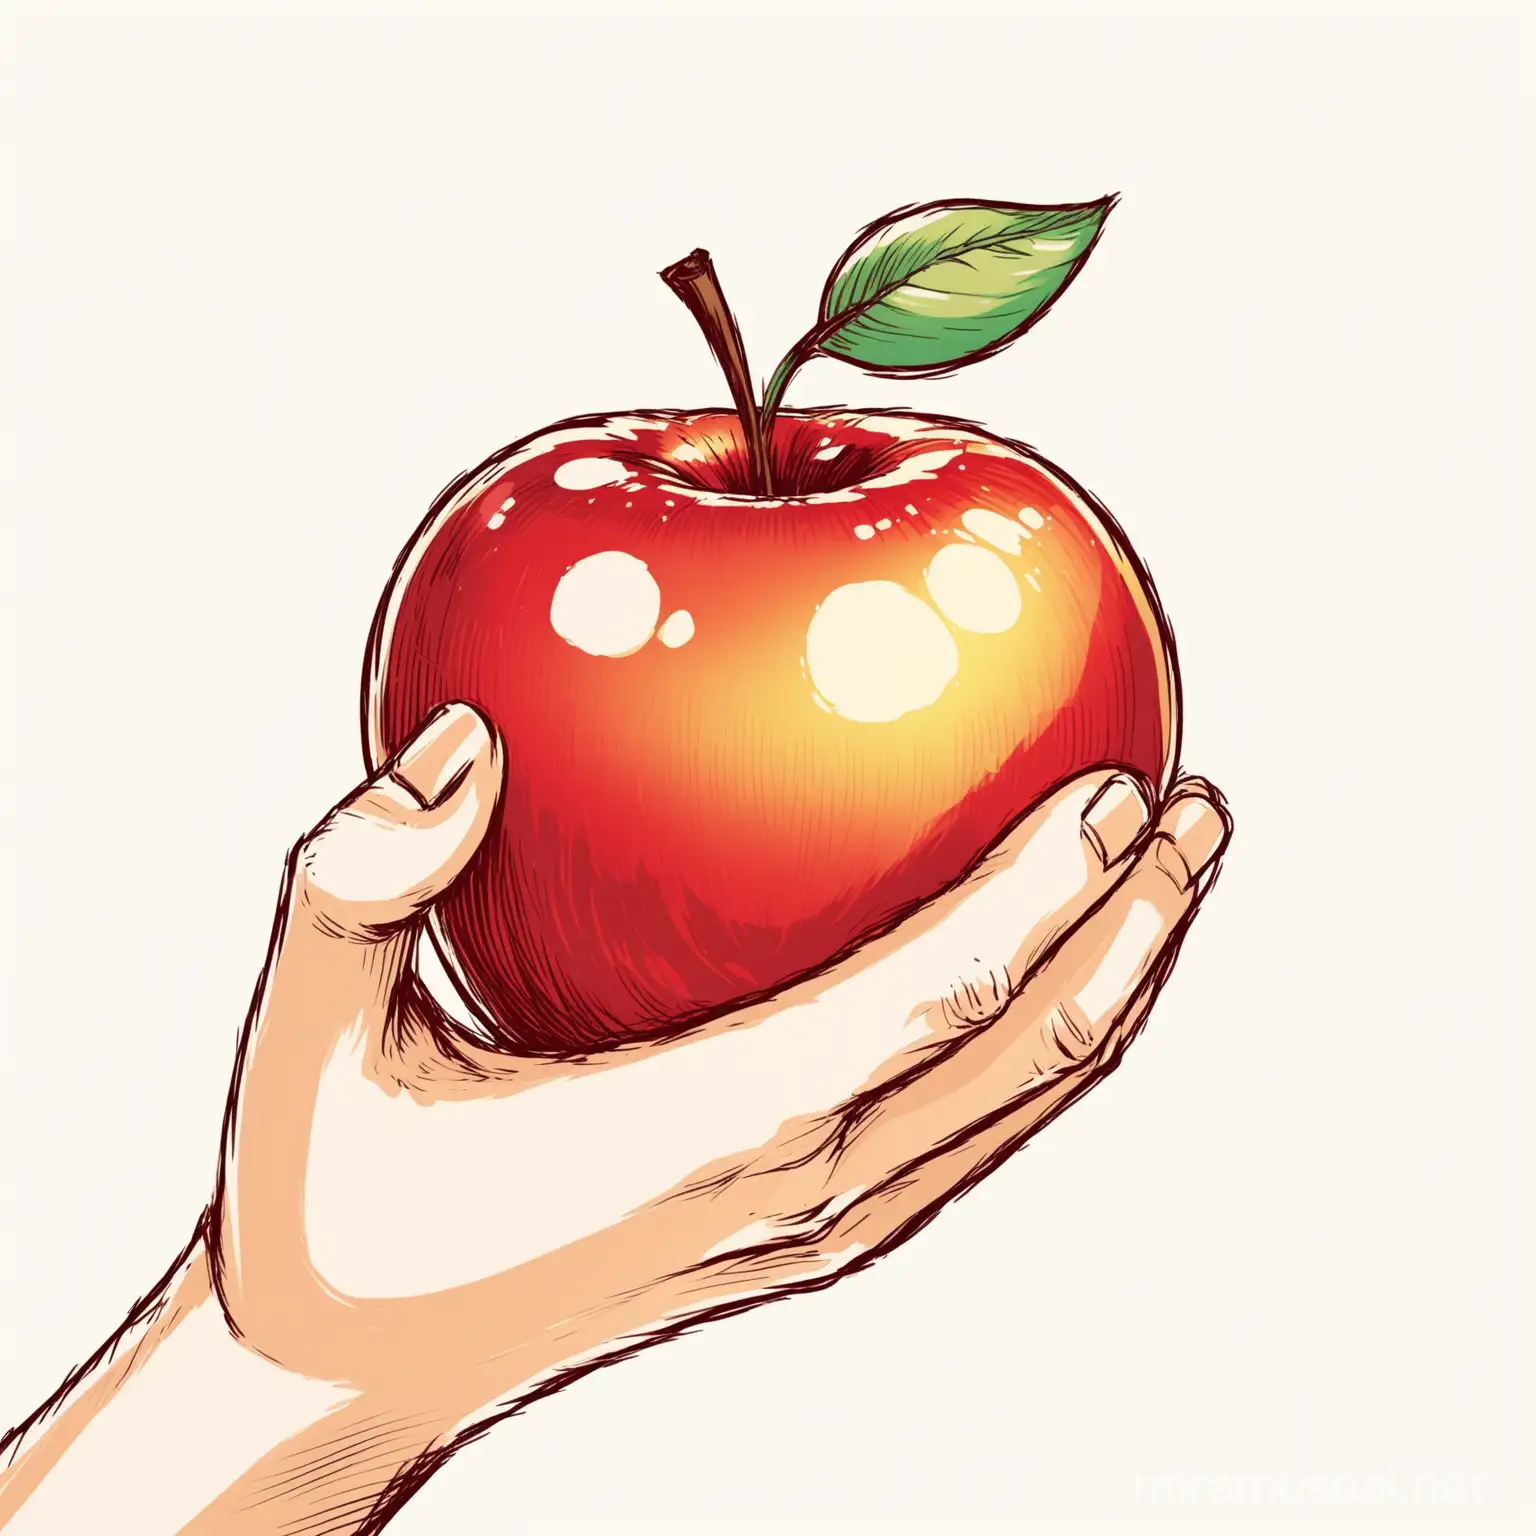 Hand Drawn Style Illustration of Apples on White Background